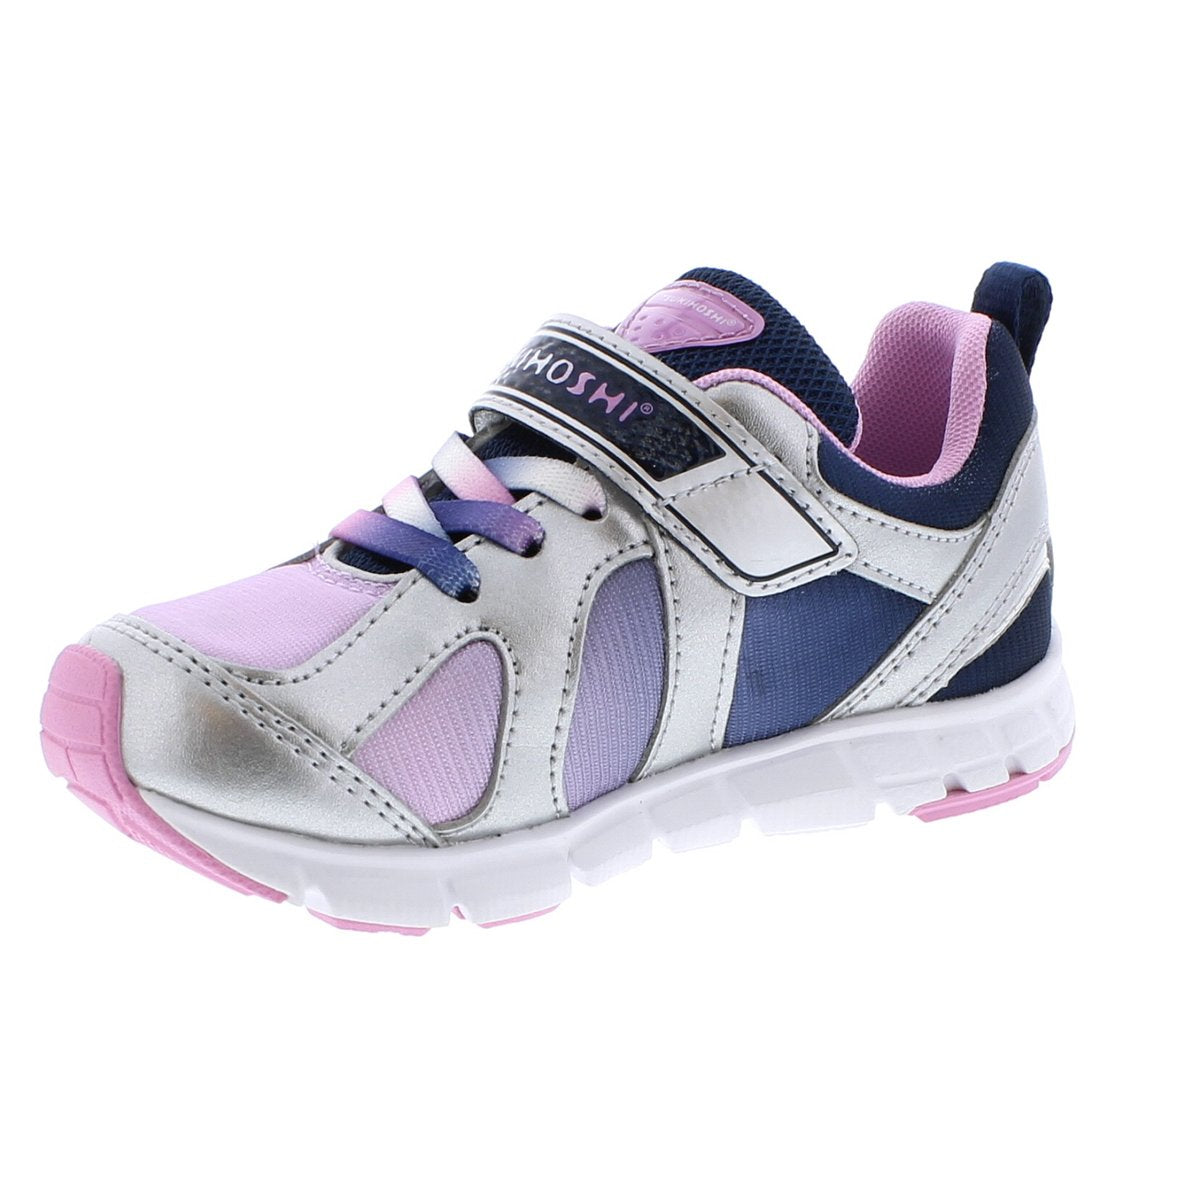 Child Tsukihoshi Rainbow Sneaker in Silver/Navy from the front view